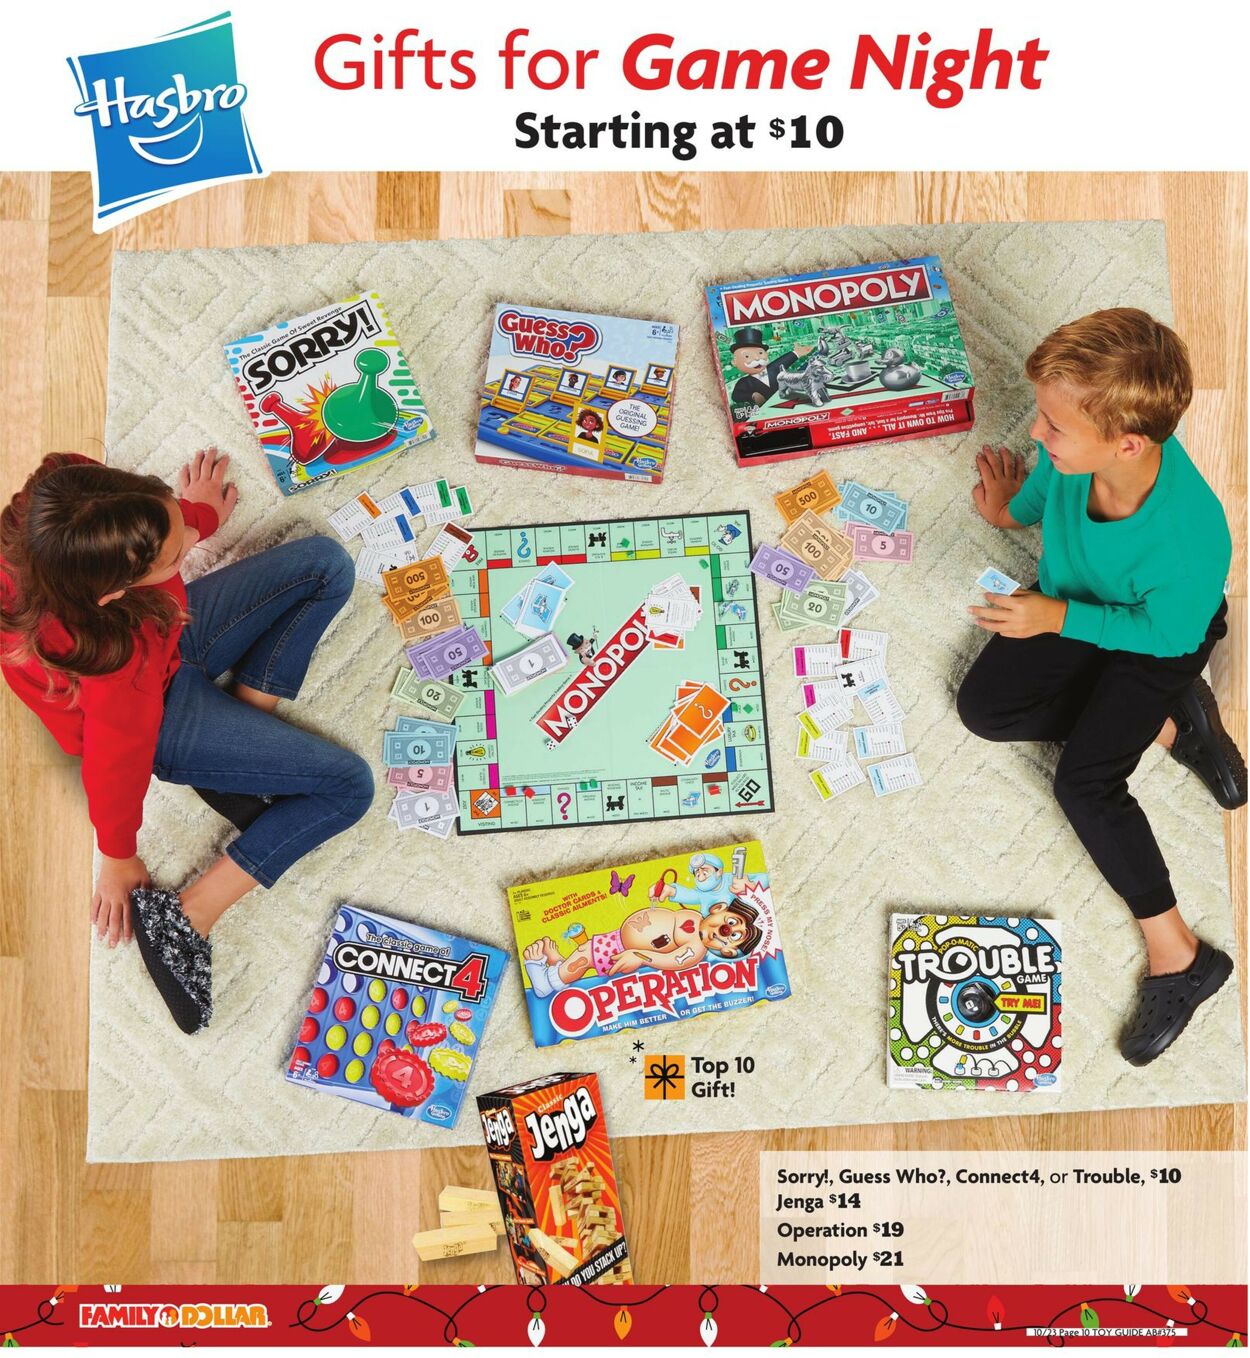 Family Dollar Ad from 10/23/2022